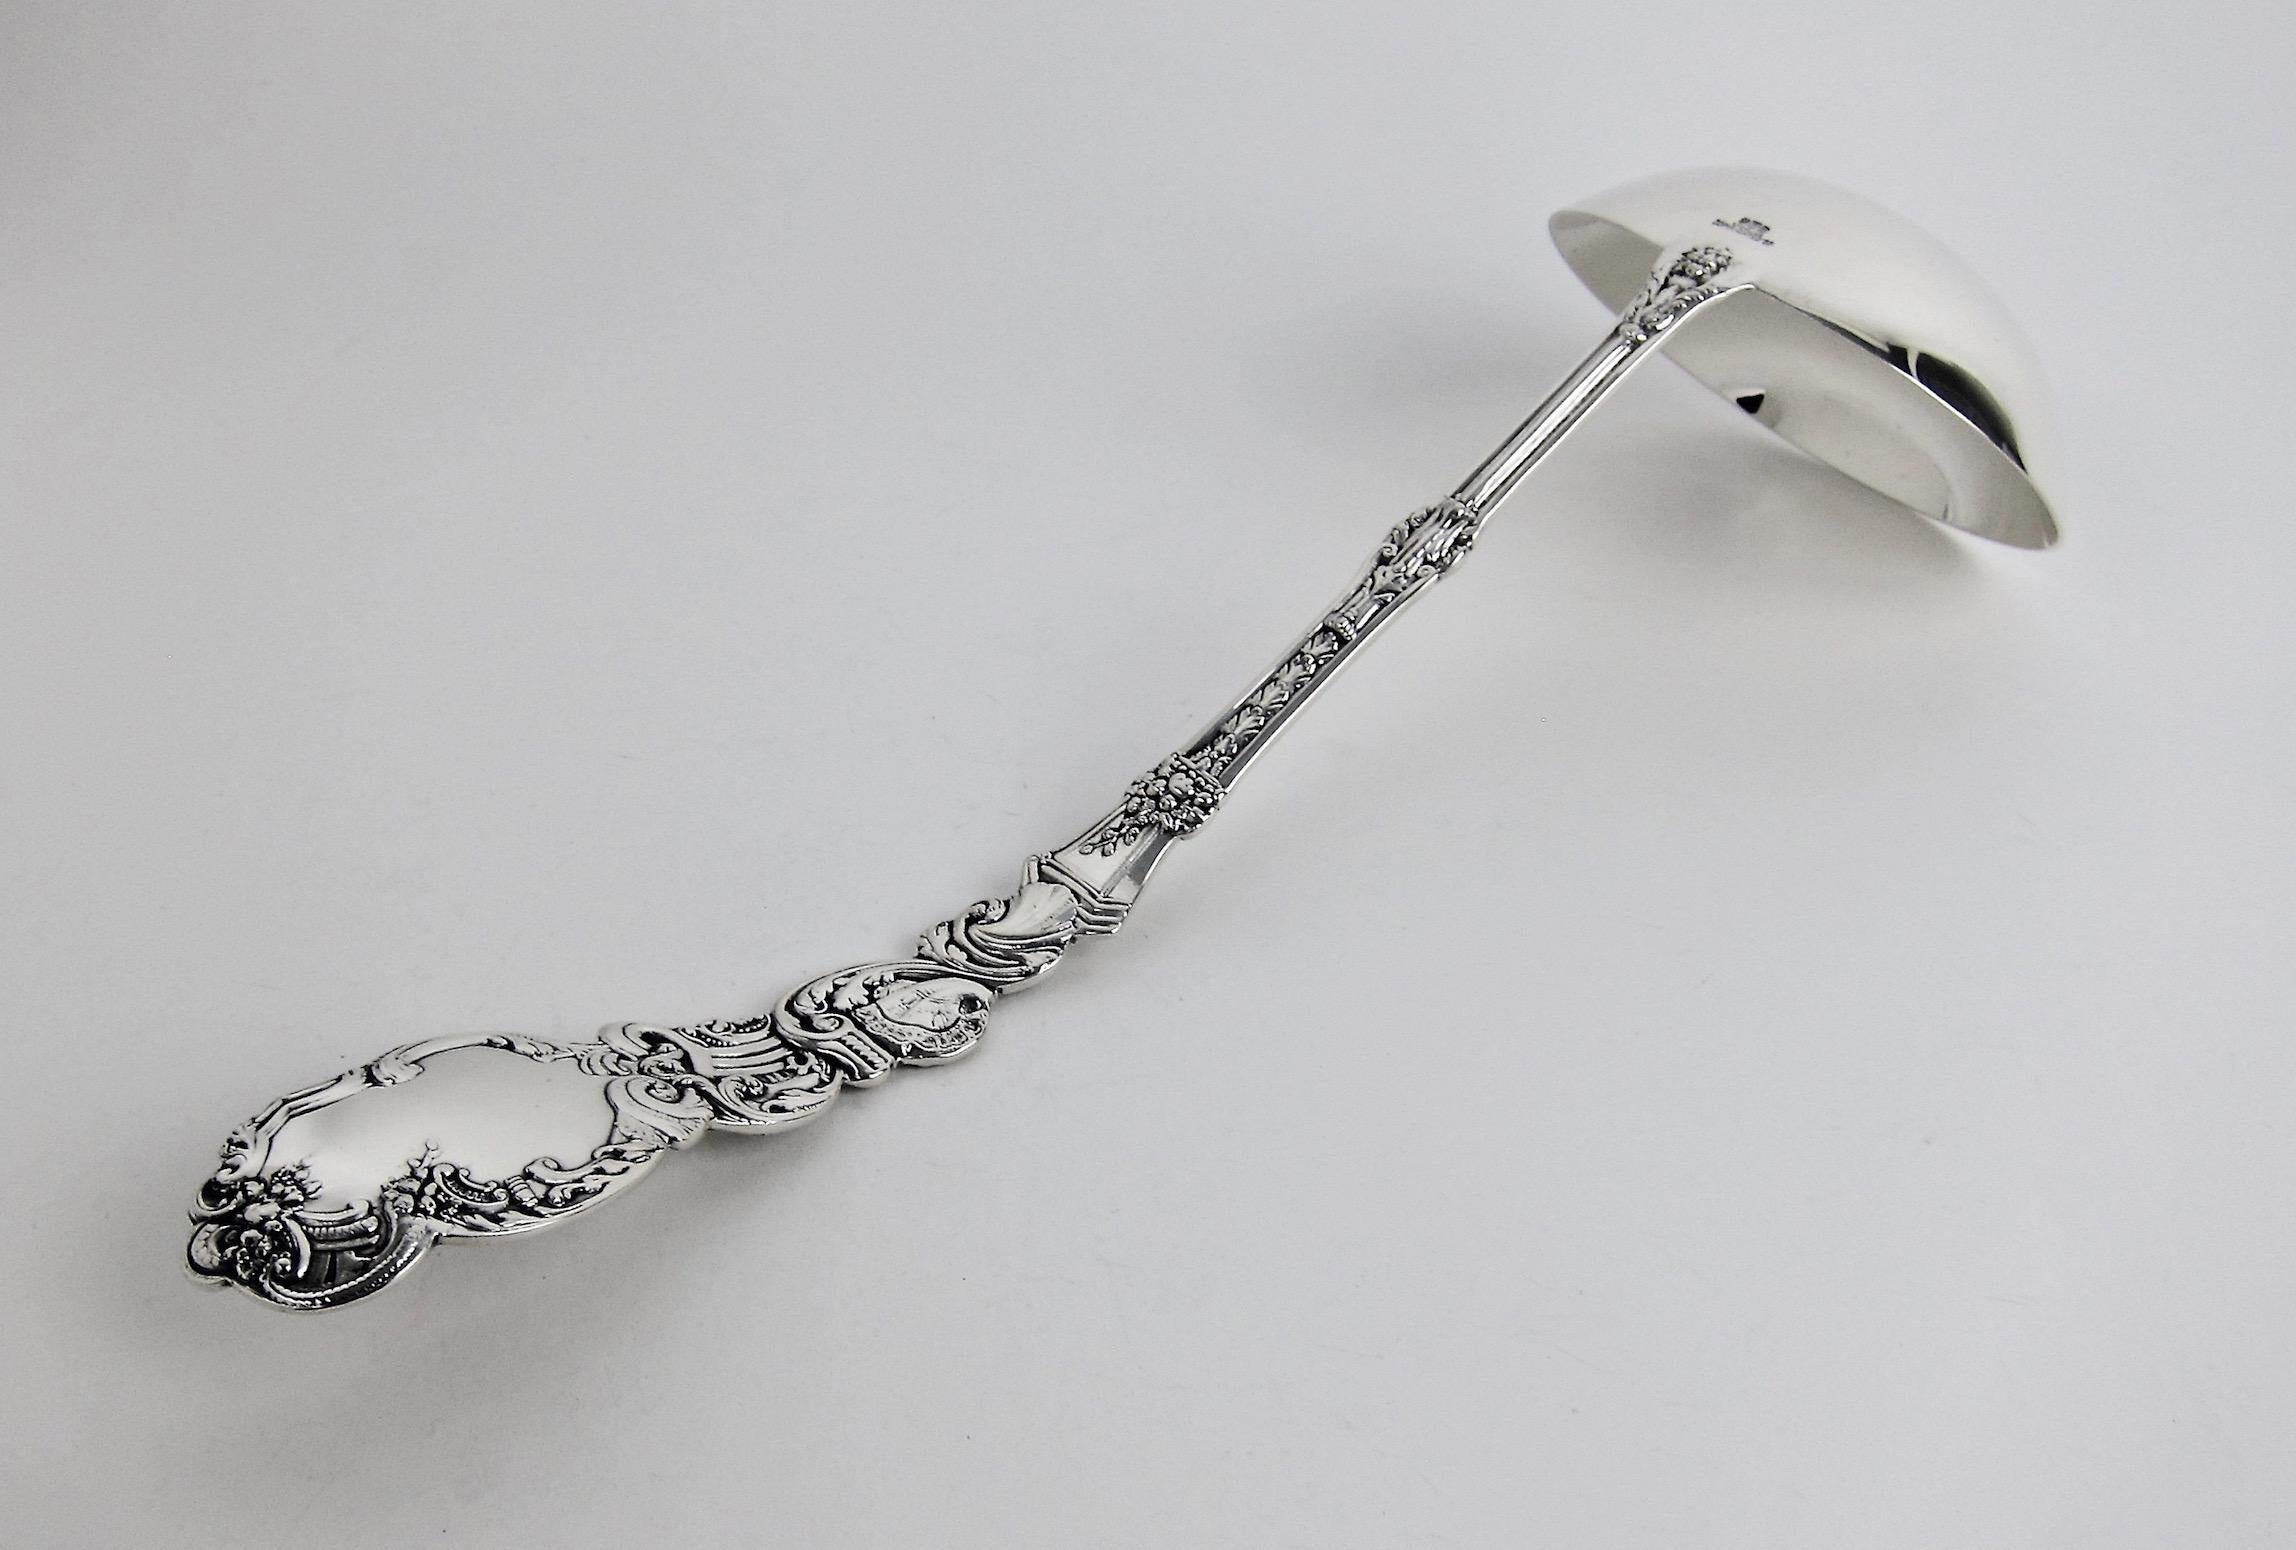 A large antique soup ladle in solid sterling silver from Gorham Manufacturing Company of Providence, Rhode Island dating circa 1890. The heavily ornamented ladle is part of Gorham's elaborate Versailles pattern, designed in the Beaux Arts style by